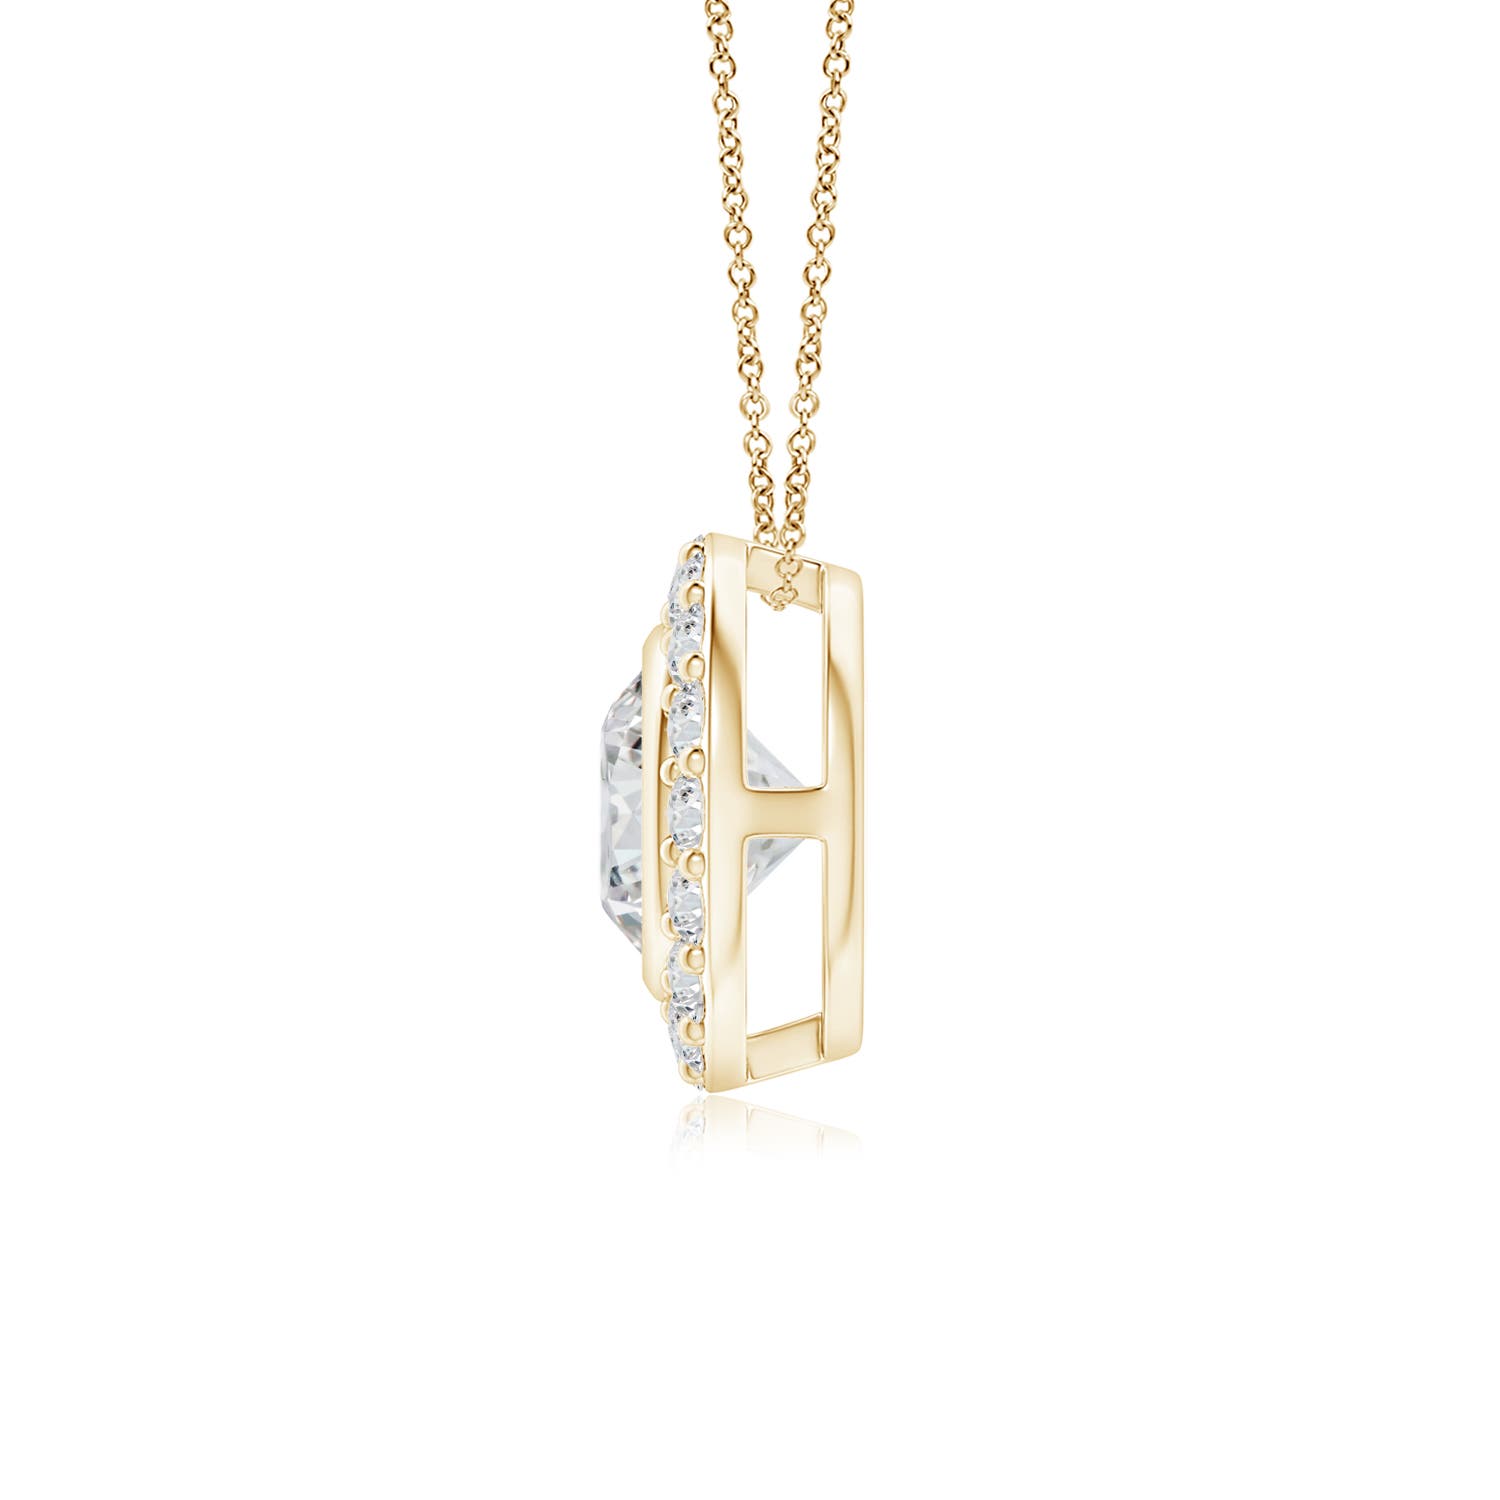 H, SI2 / 0.66 CT / 14 KT Yellow Gold